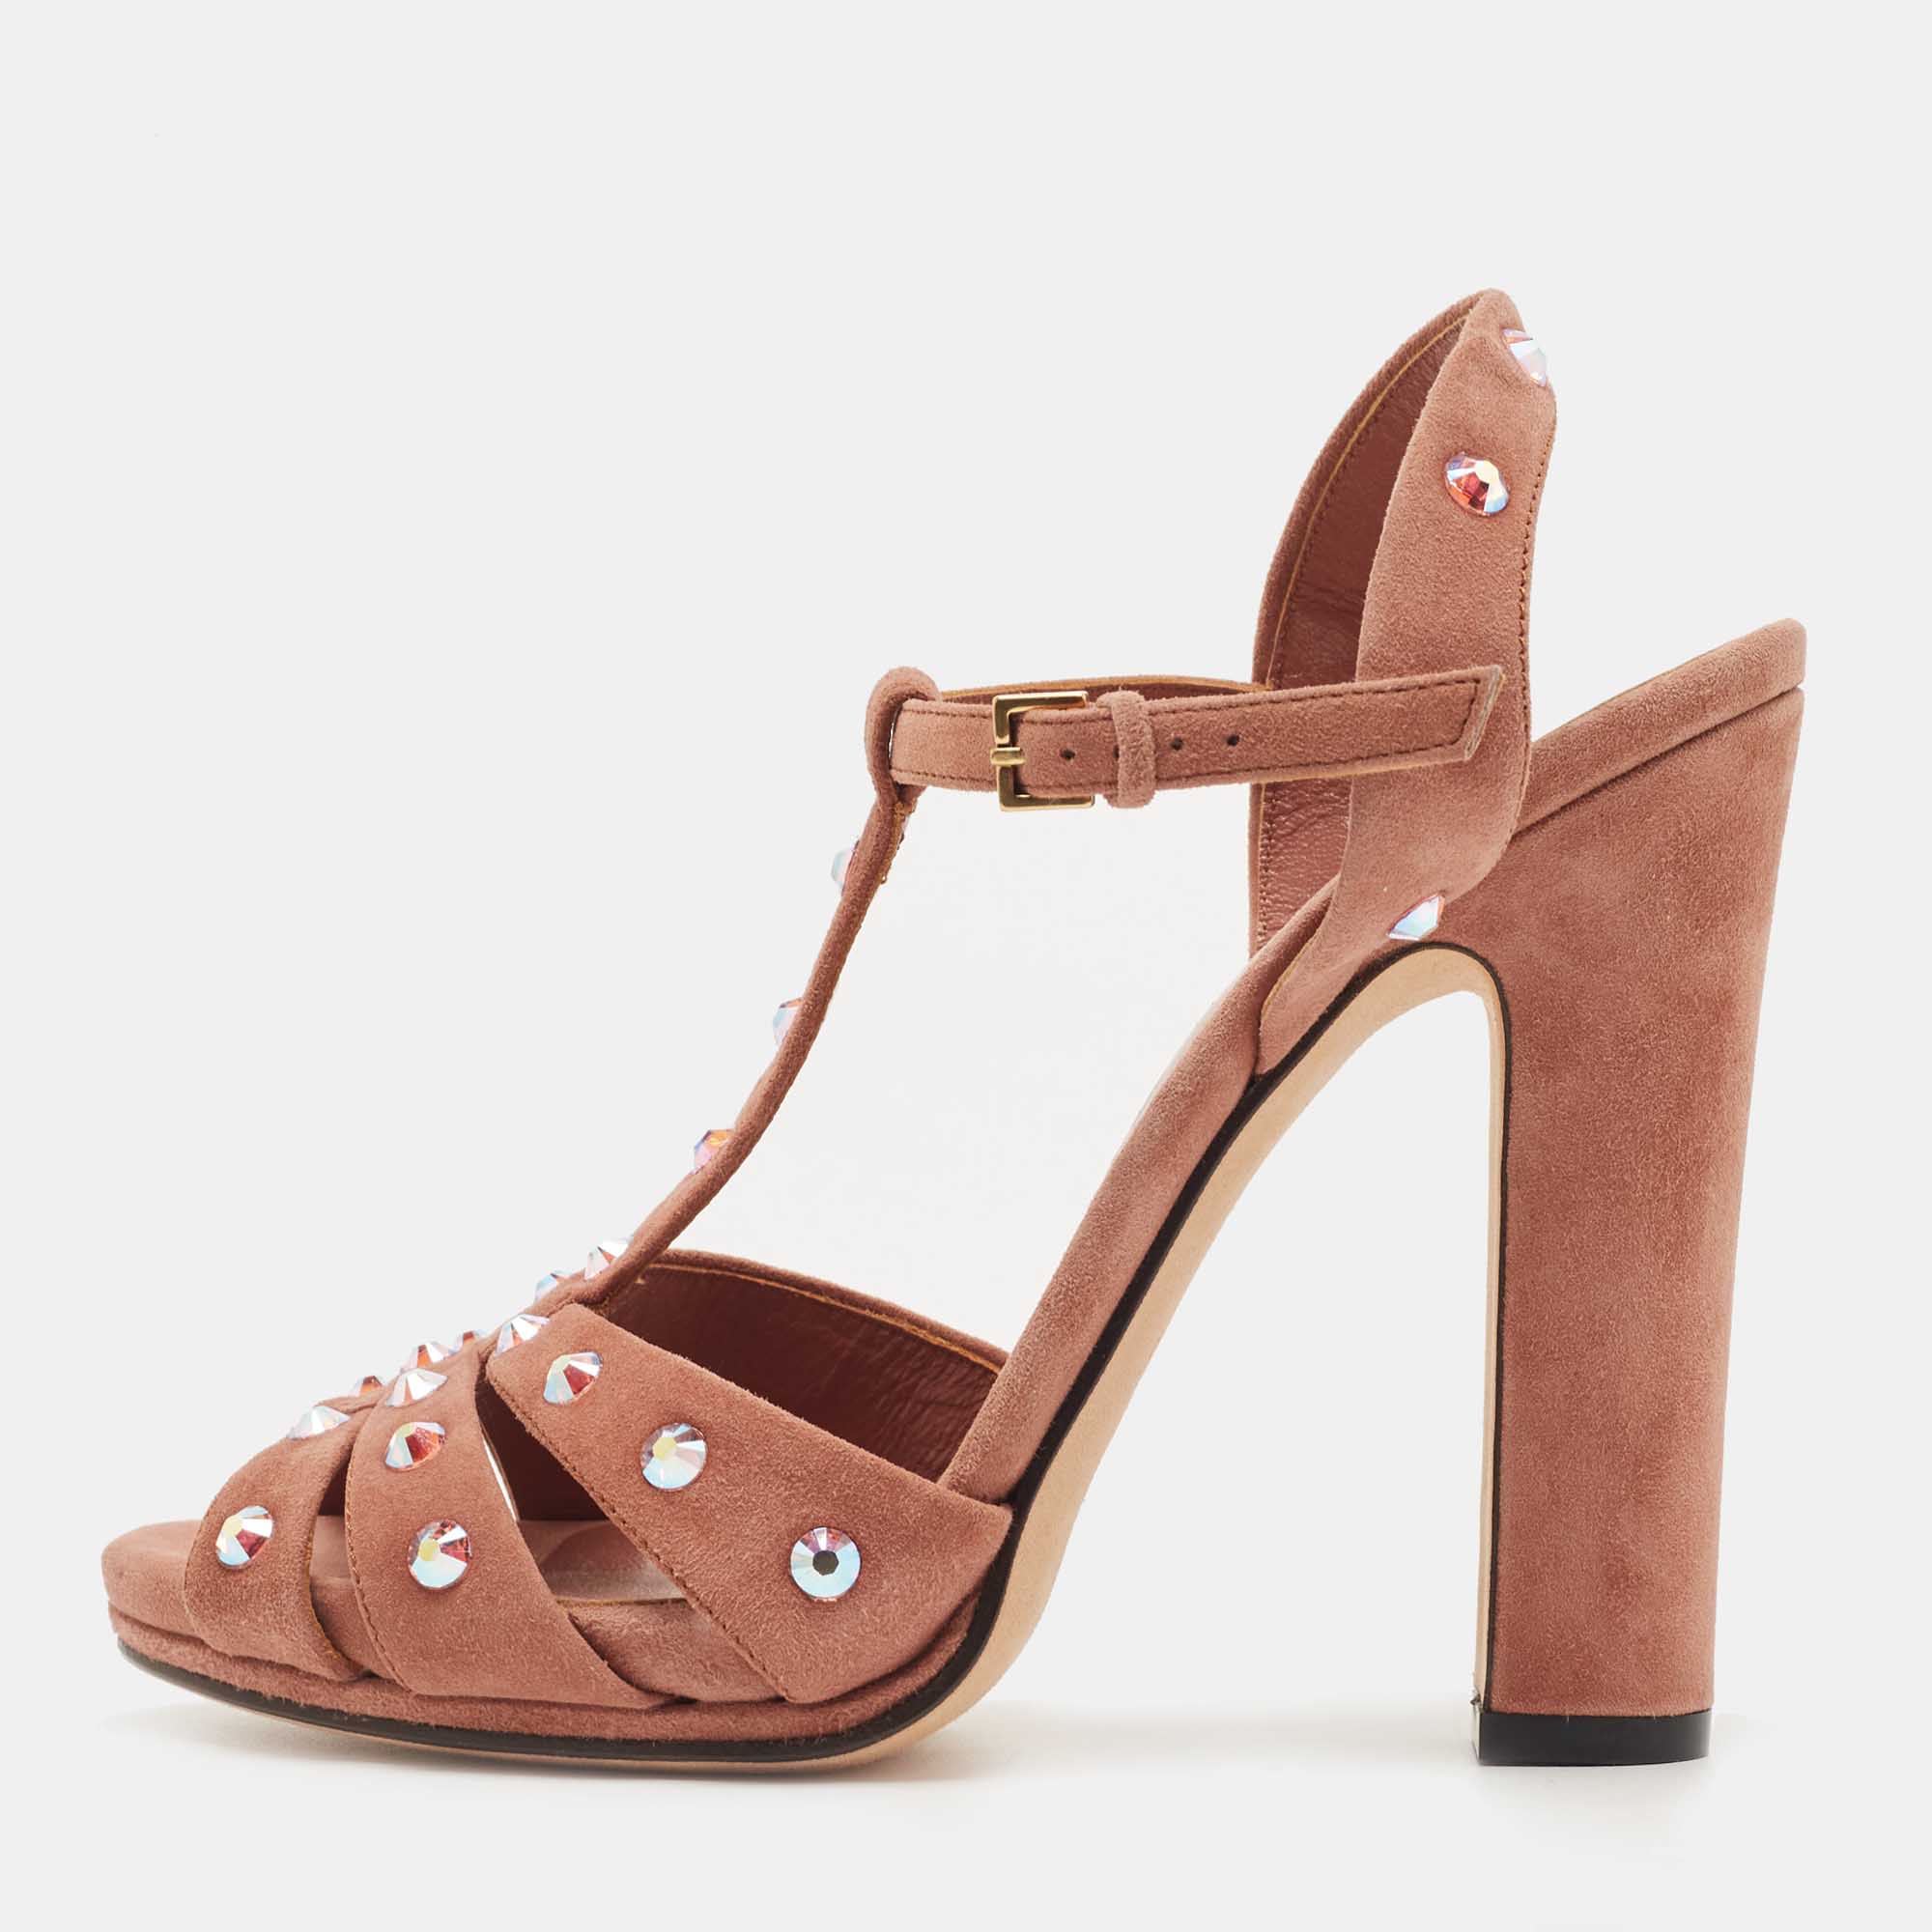 Gucci Pink Suede Studded Ankle Strap Sandals Size 36